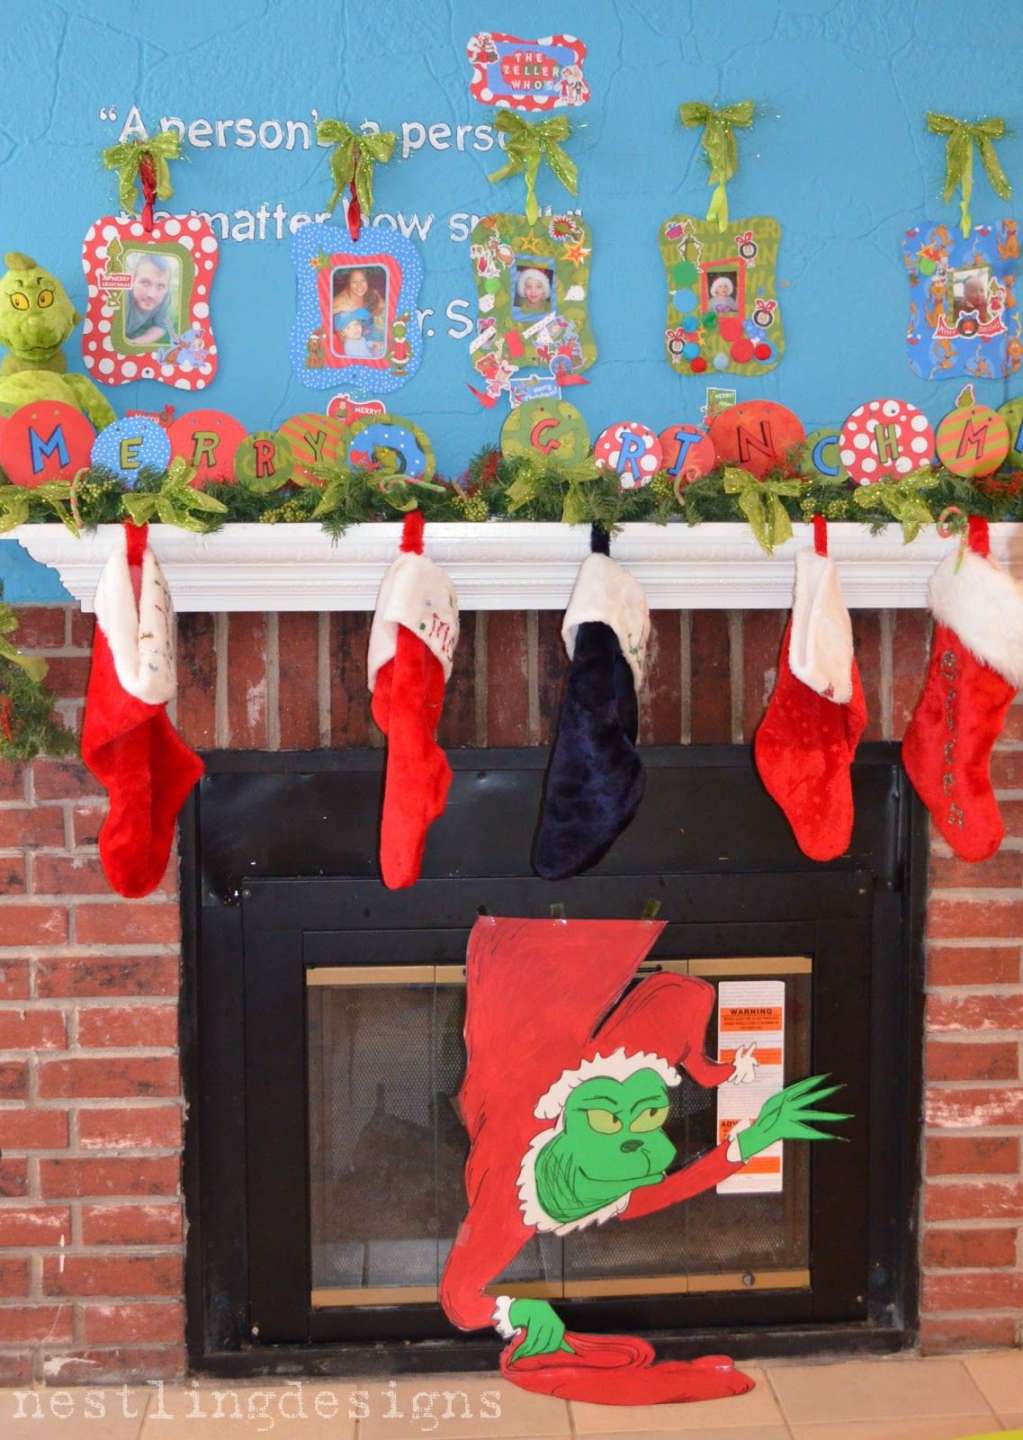 Have the Grinch come out of the fireplace #grinch #grinchmas